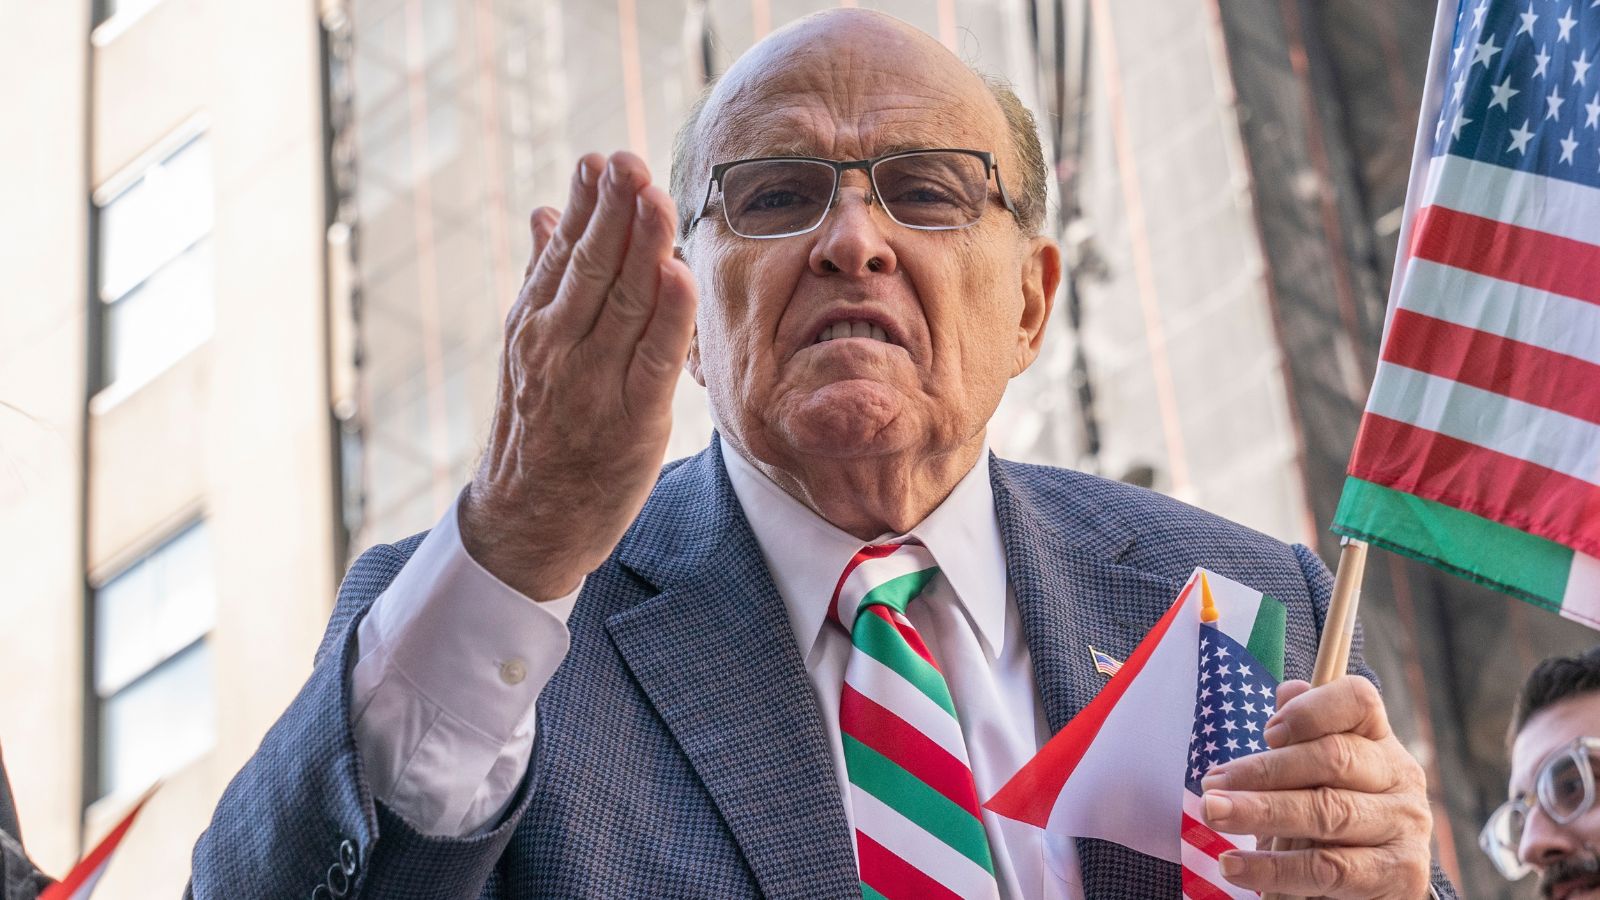 “The Justice System Allows for Folks to Flagrantly Hide Funds and Then Cry They Are Too Poor To Pay Judgments”: Georgia Poll Workers Seek $43 Million in Damages in Giuliani Defamation Case